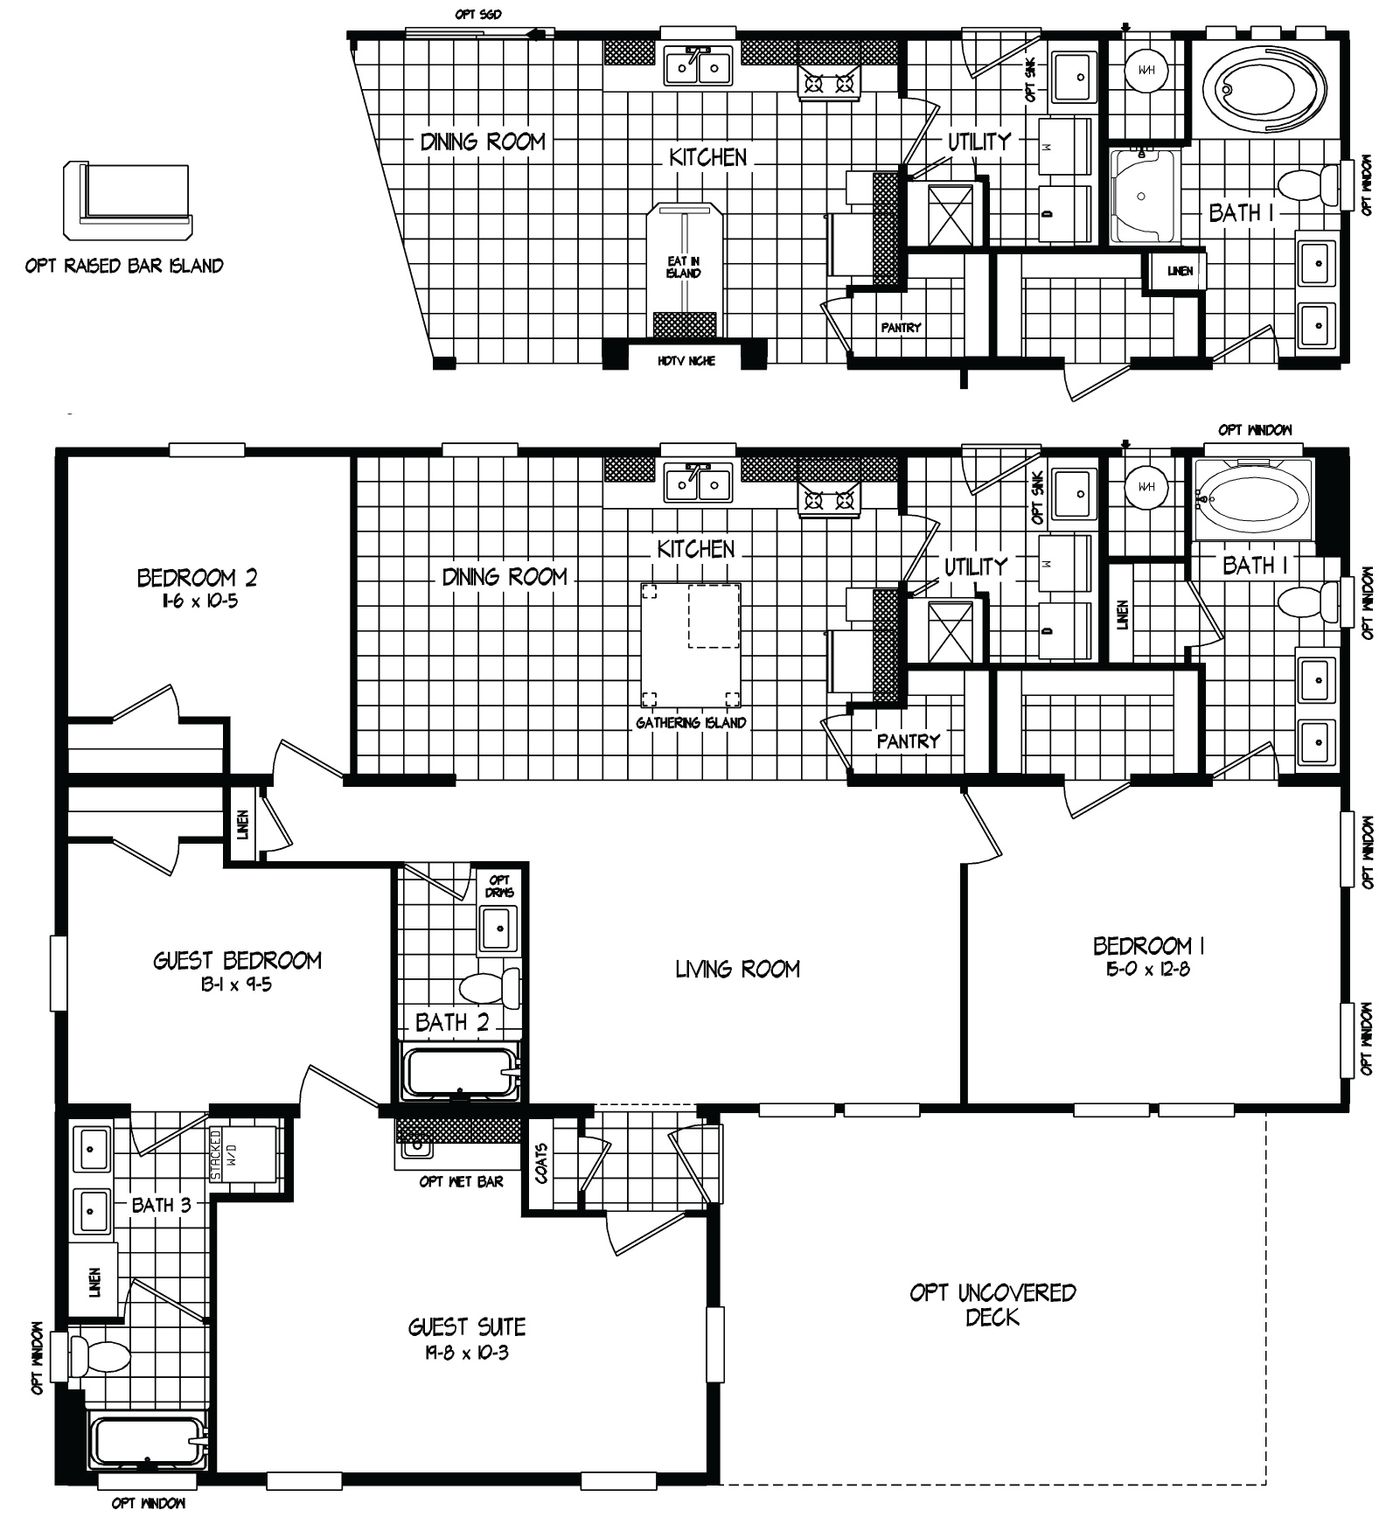 The HALLMARK PLUS Floor Plan. This Manufactured Mobile Home features 3 bedrooms and 3 baths.